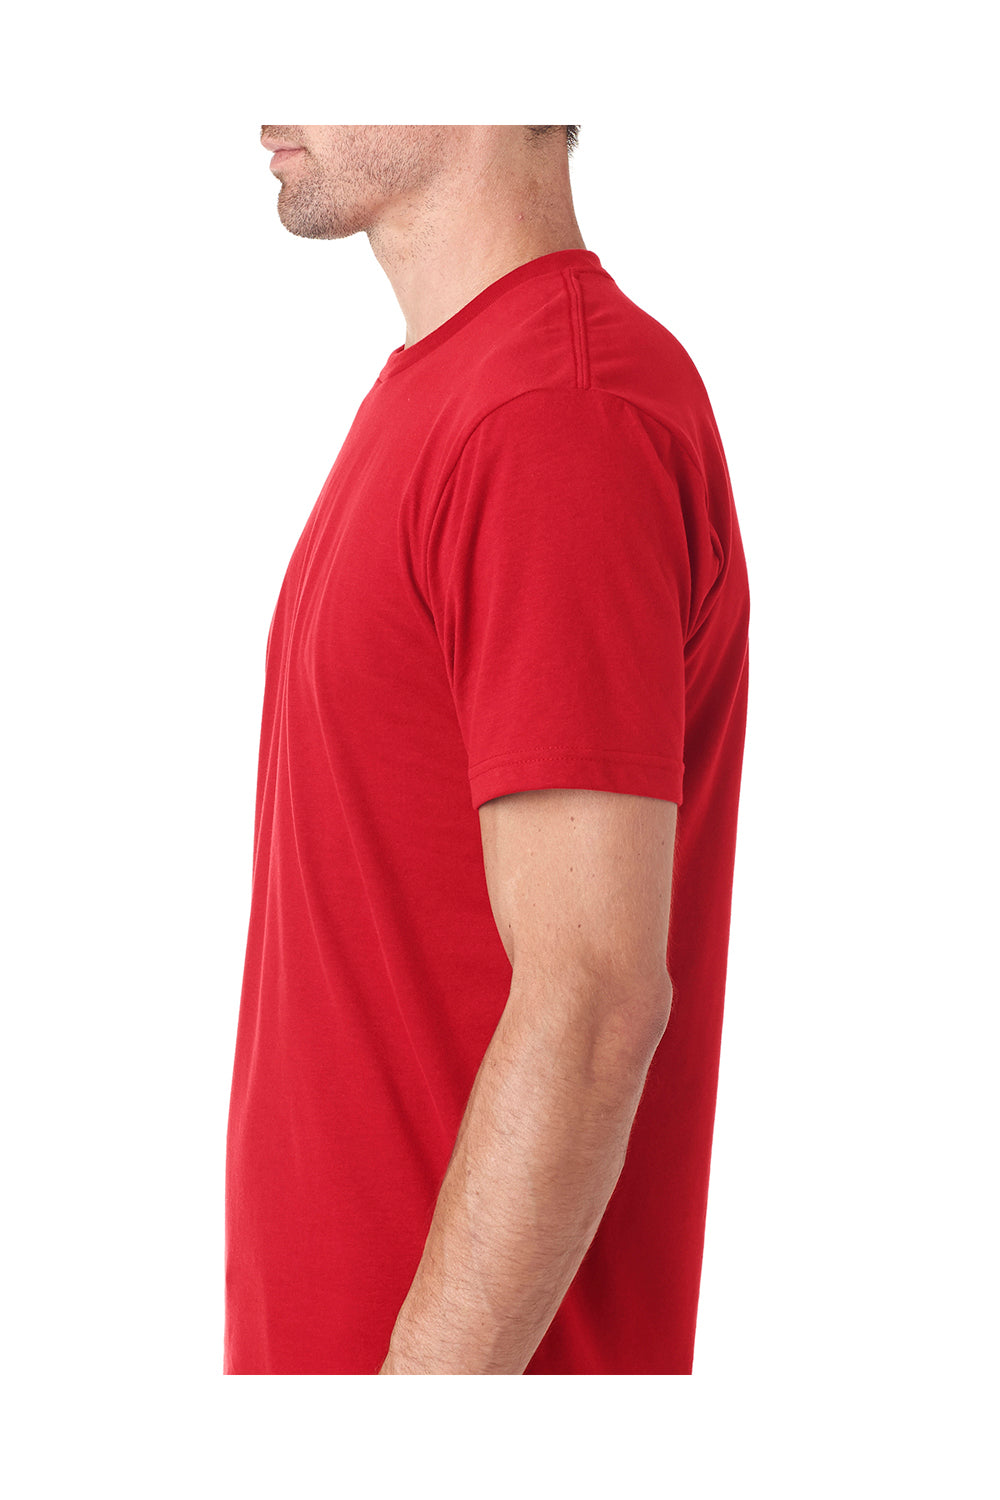 Next Level 6410 Mens Sueded Jersey Short Sleeve Crewneck T-Shirt Red Side